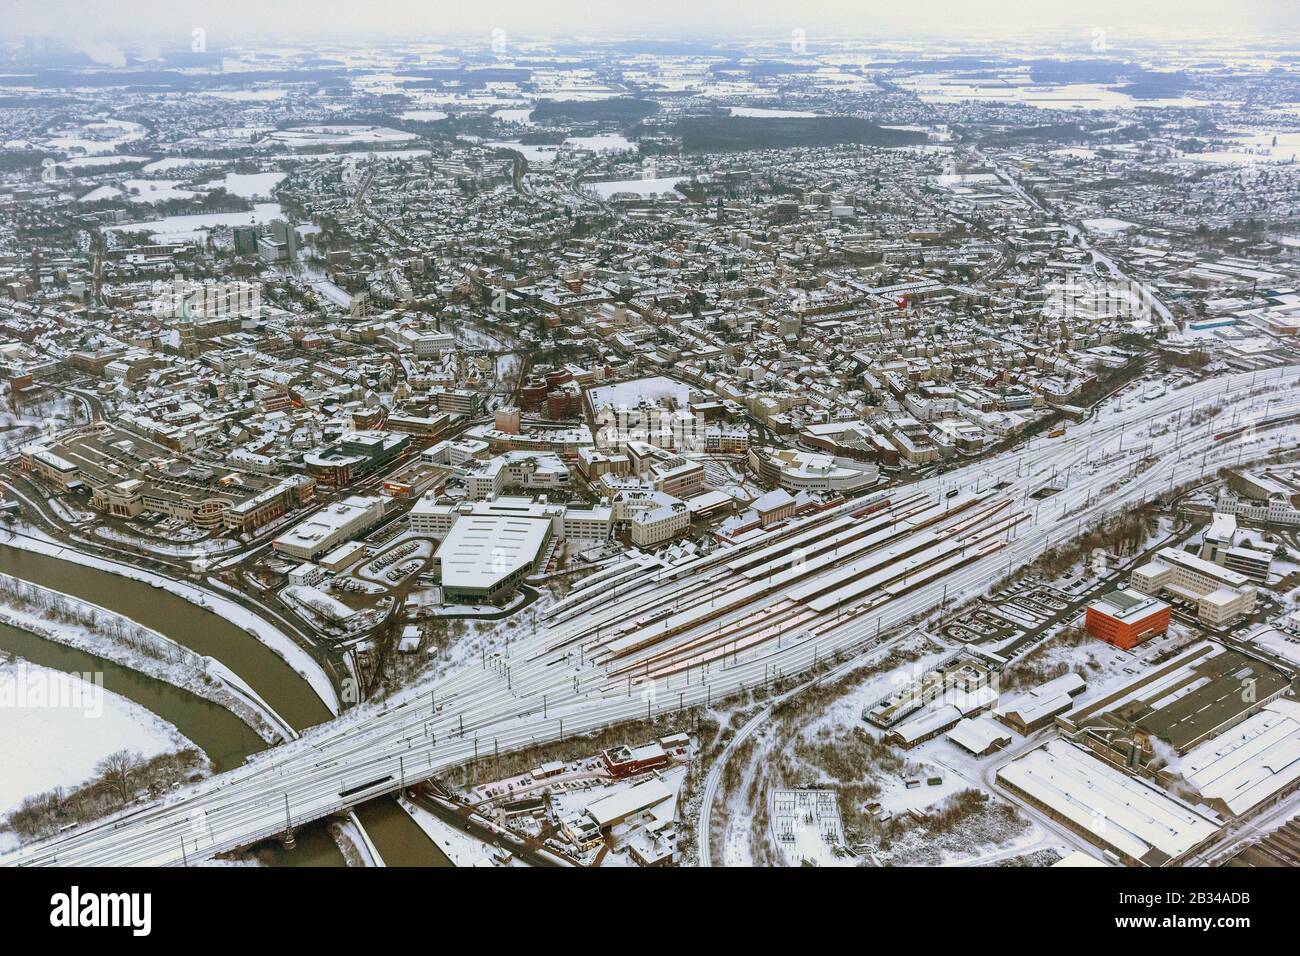 center of Hamm with main station and Kleist Forum, 26.01.2013, aerial view, Germany, North Rhine-Westphalia, Ruhr Area, Hamm Stock Photo